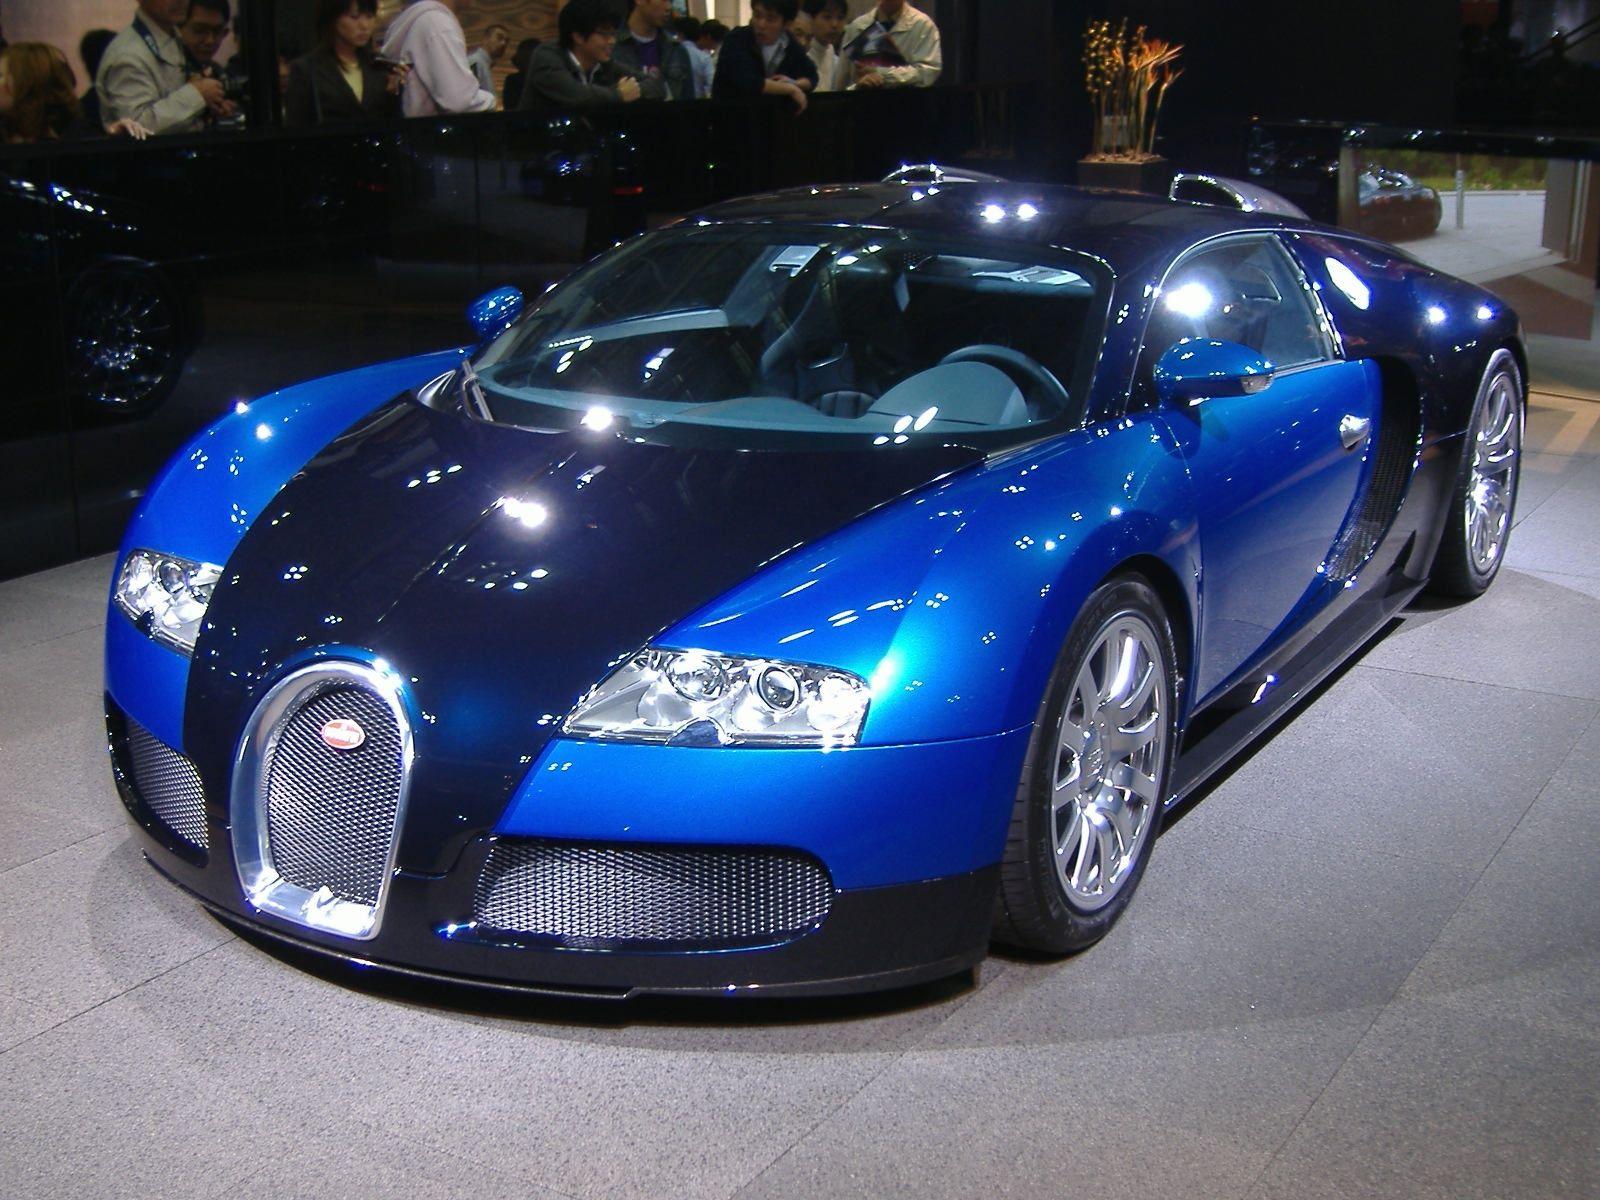 Bugatti Veyron 16.4. source for exotic car information